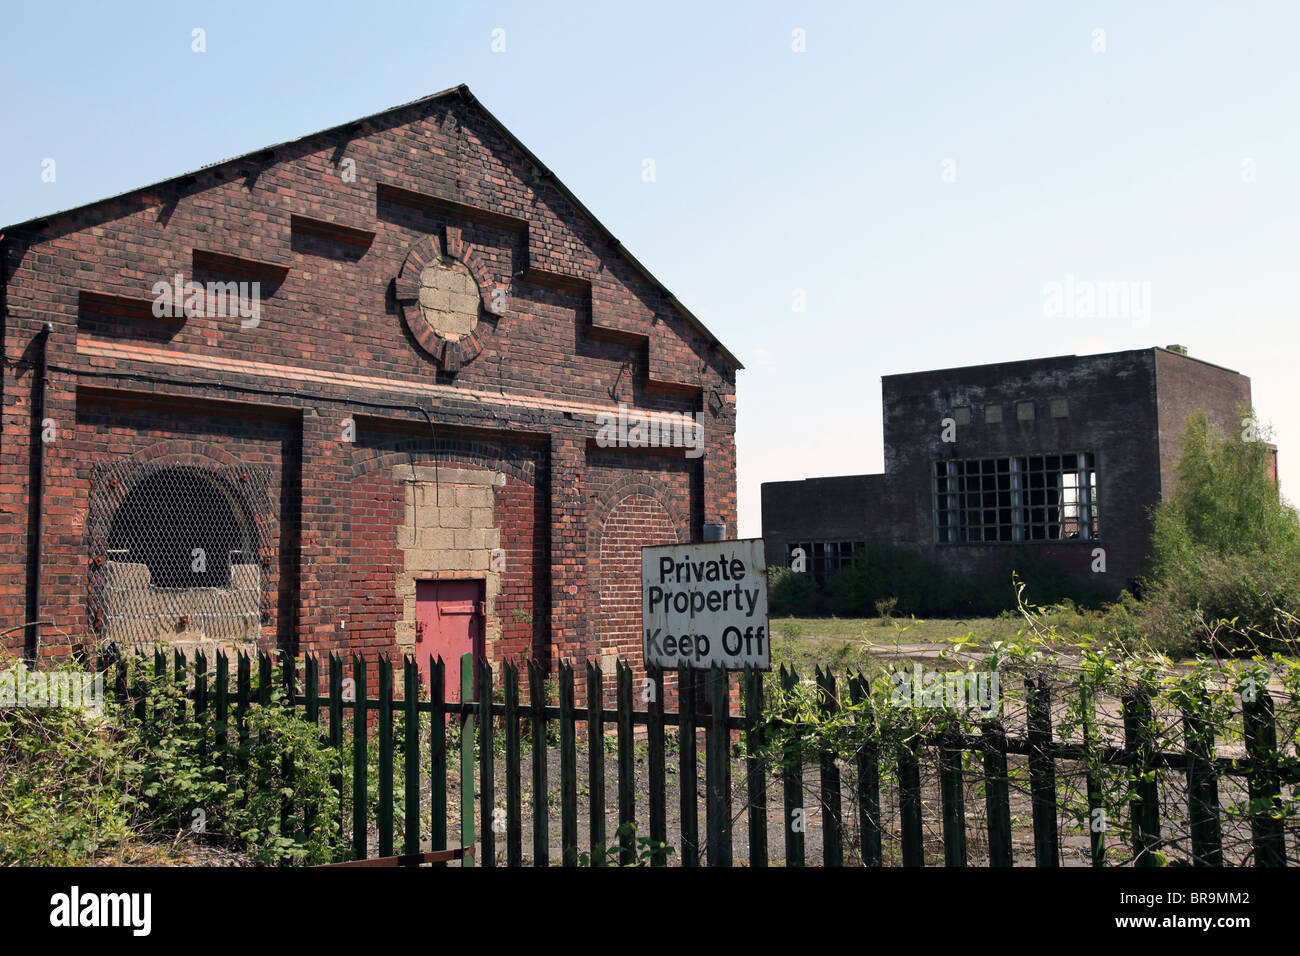 Abandoned coal mine buildings. Image taken at Snowdown Colliery near to Canterbury, Kent, UK. Stock Photo